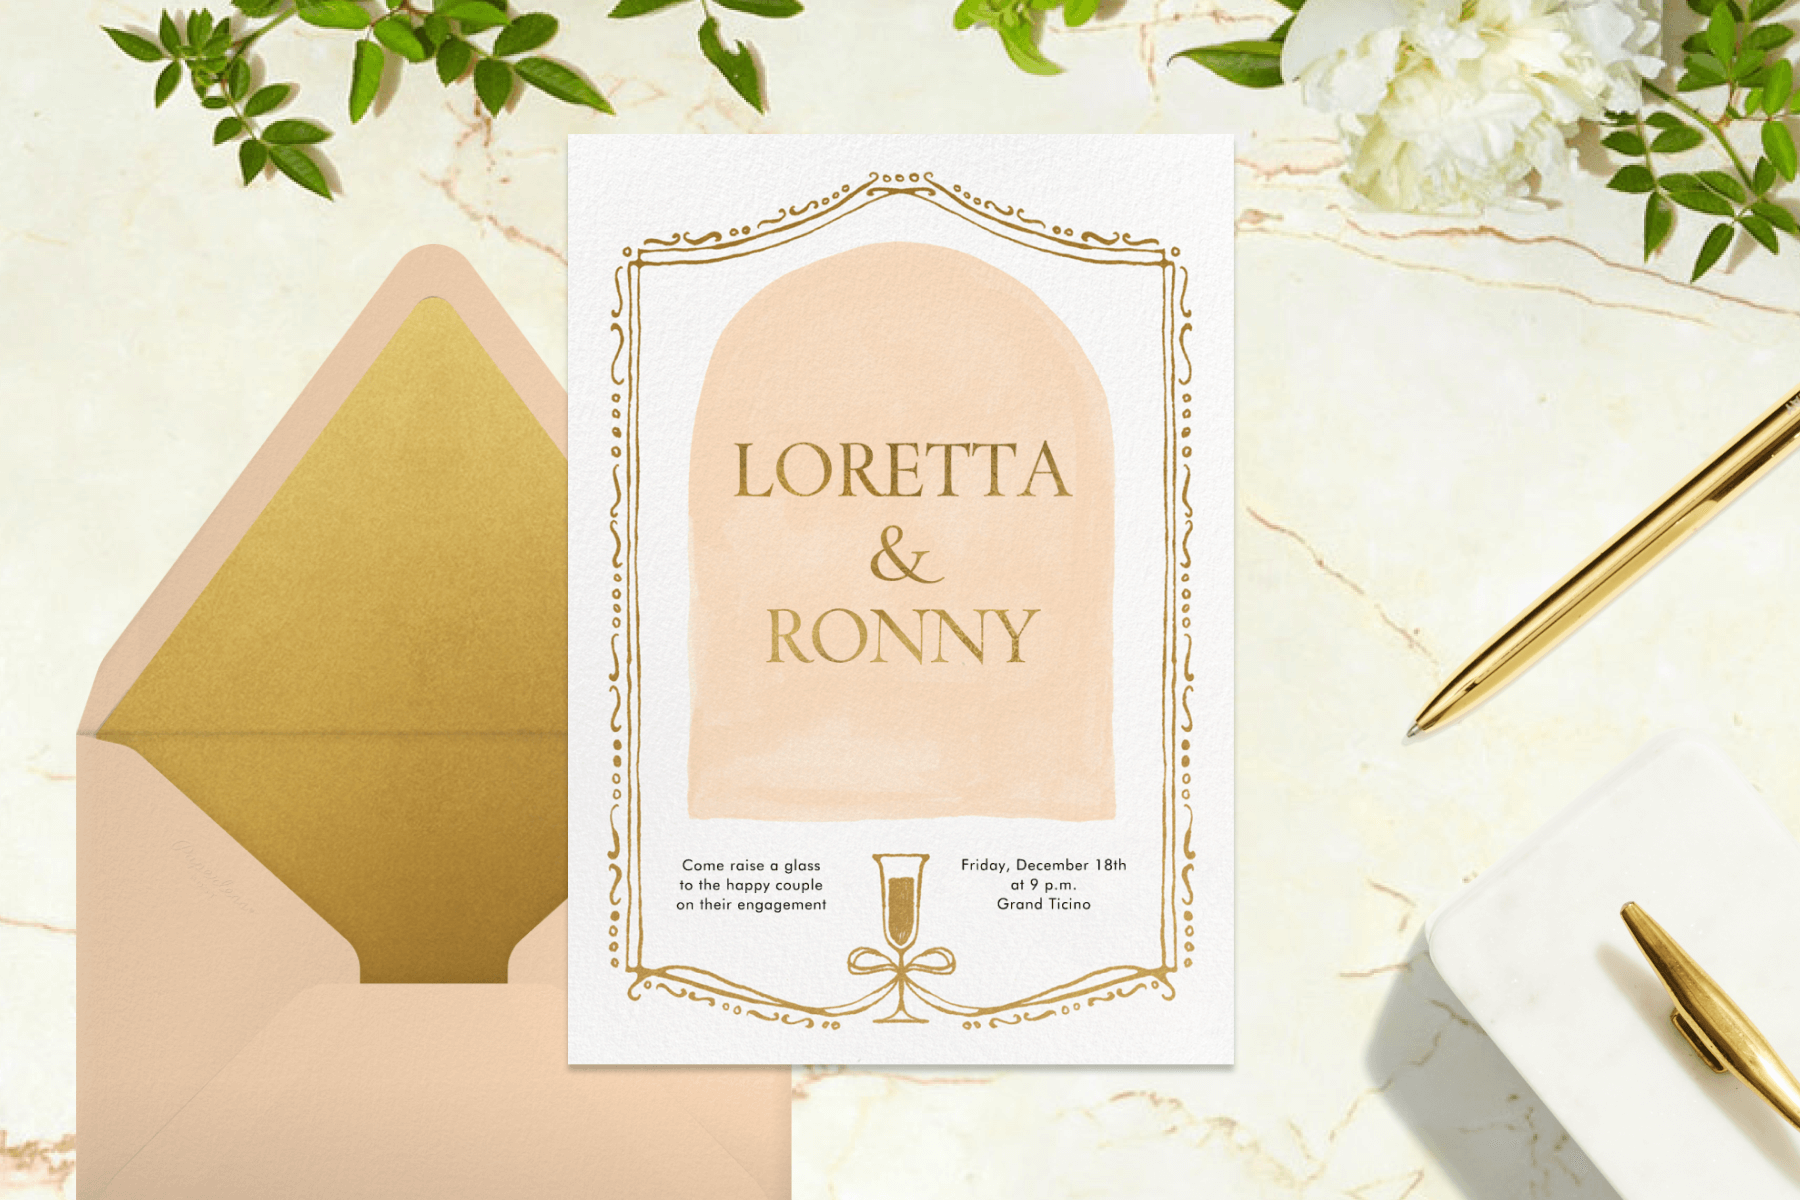 An engagement party invitation with an arch-shaped text box and an ornate frame with a gold champagne glass. The invitation is paired with a pink and gold envelope and is surrounded by greenery, a gold pen, and a small box.